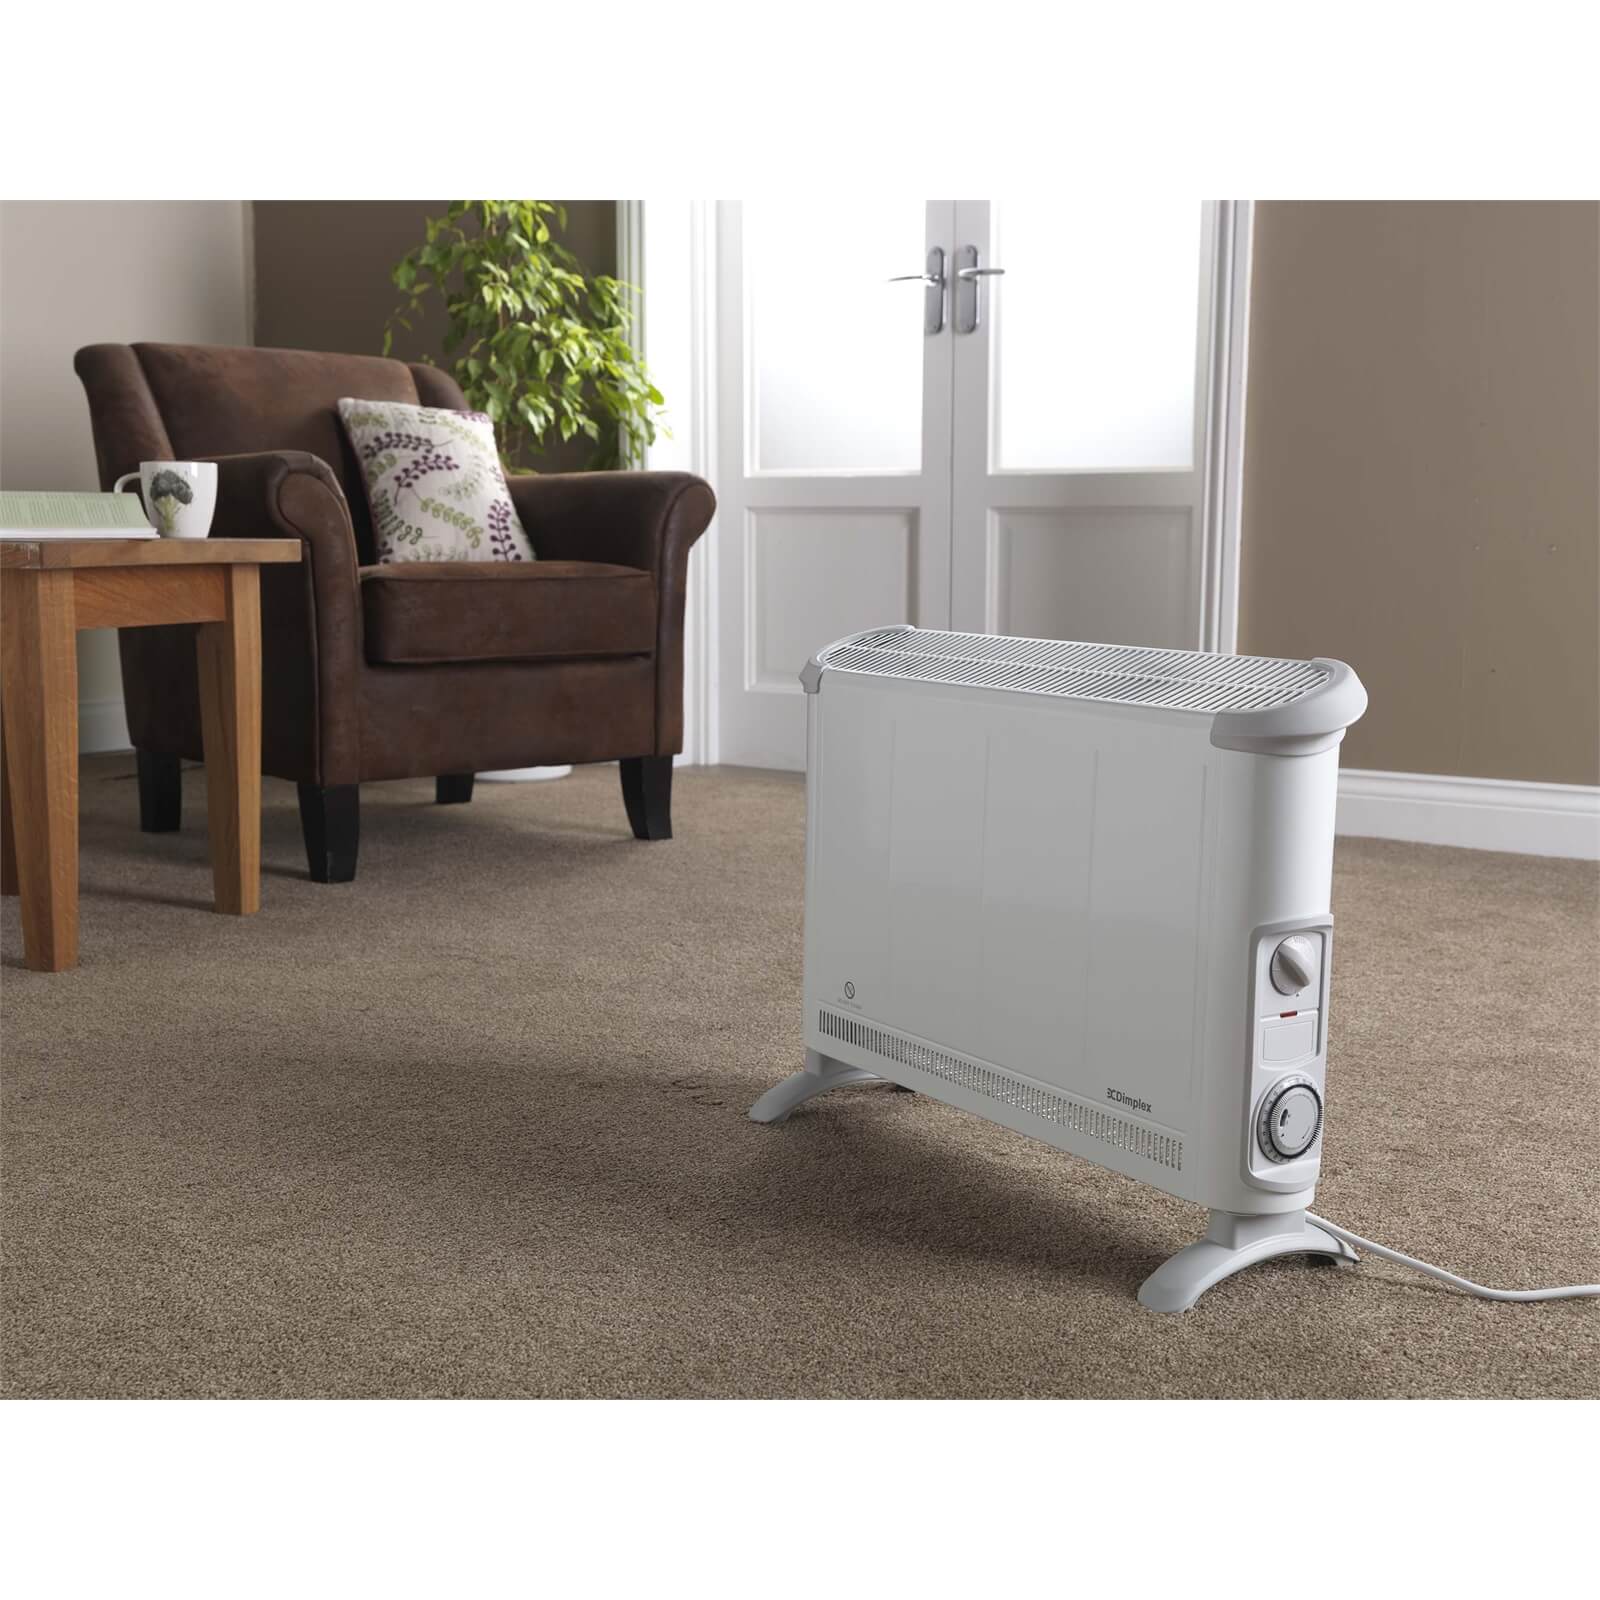 Dimplex 2kW Convector with 24 hour timer -White